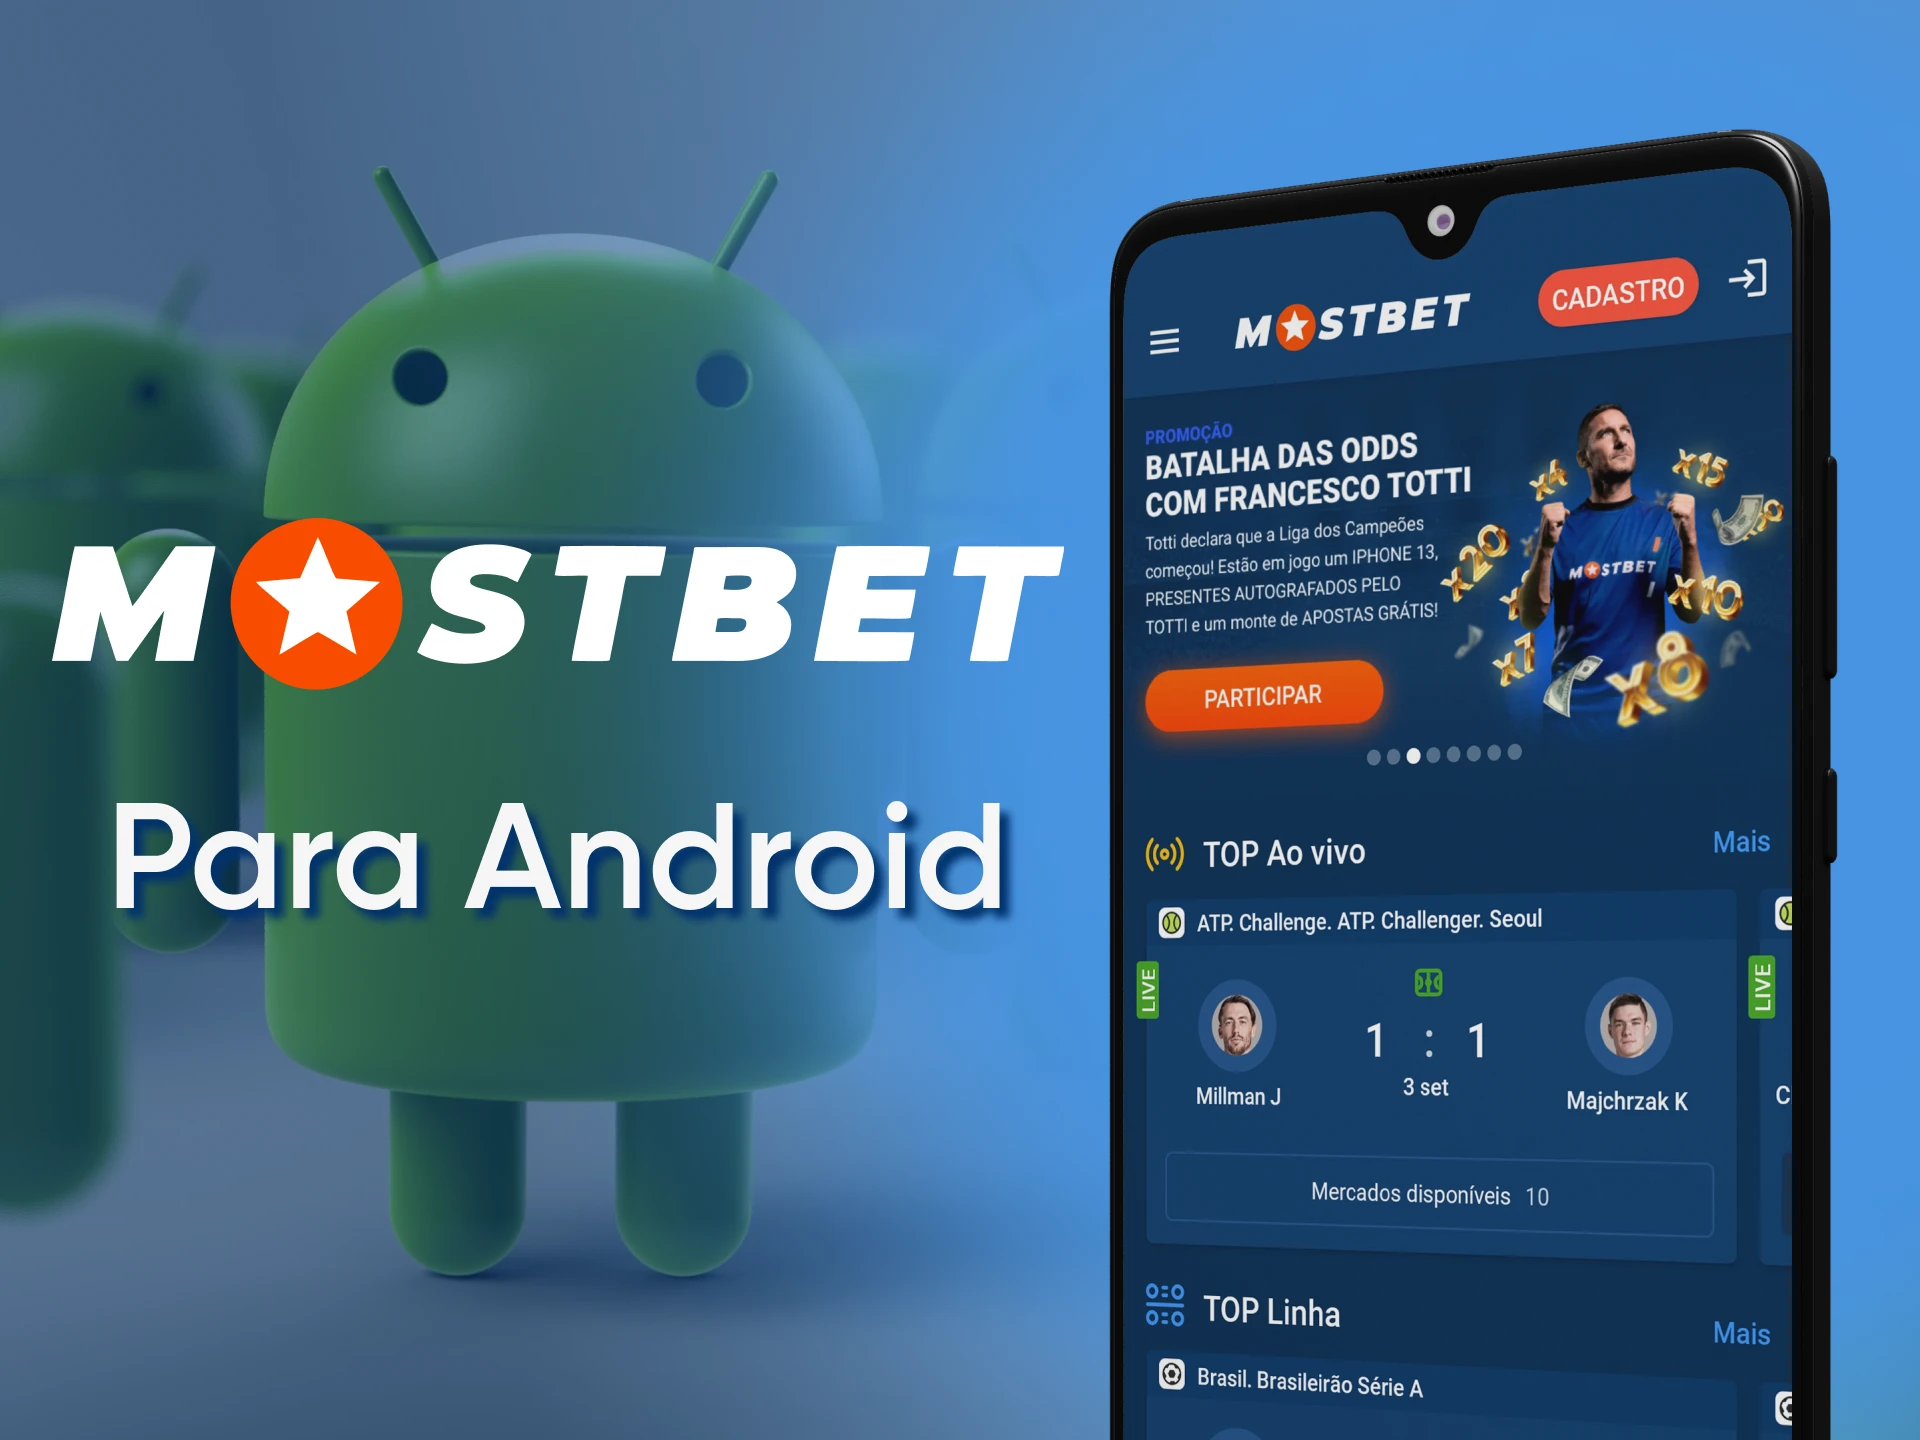 The Android version of the Mostbet mobile app has the same features as the versions for other platforms.